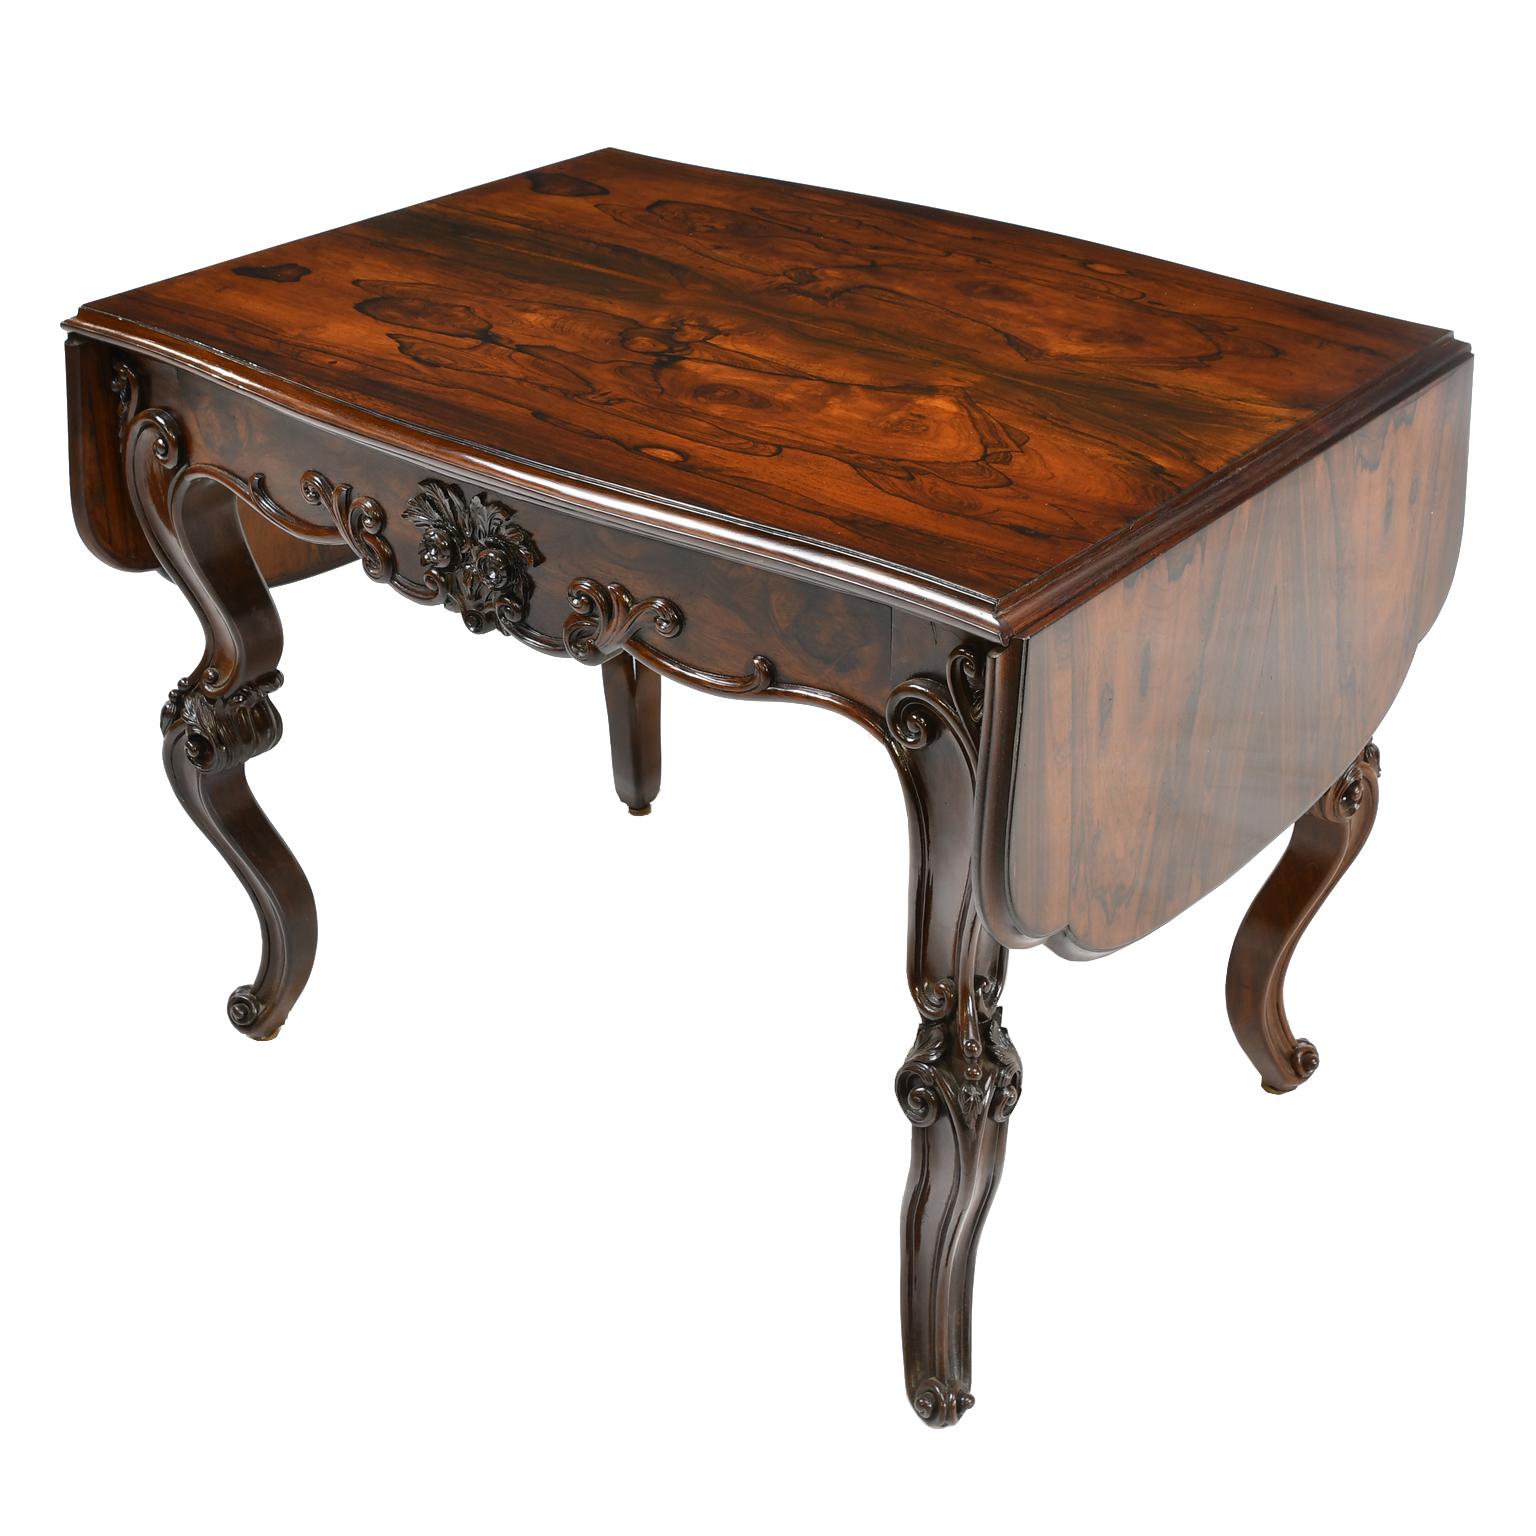 Mid-19th Century Rosewood American Rococo Revival Sofa Table or Writing Table NYC, circa 1840 For Sale